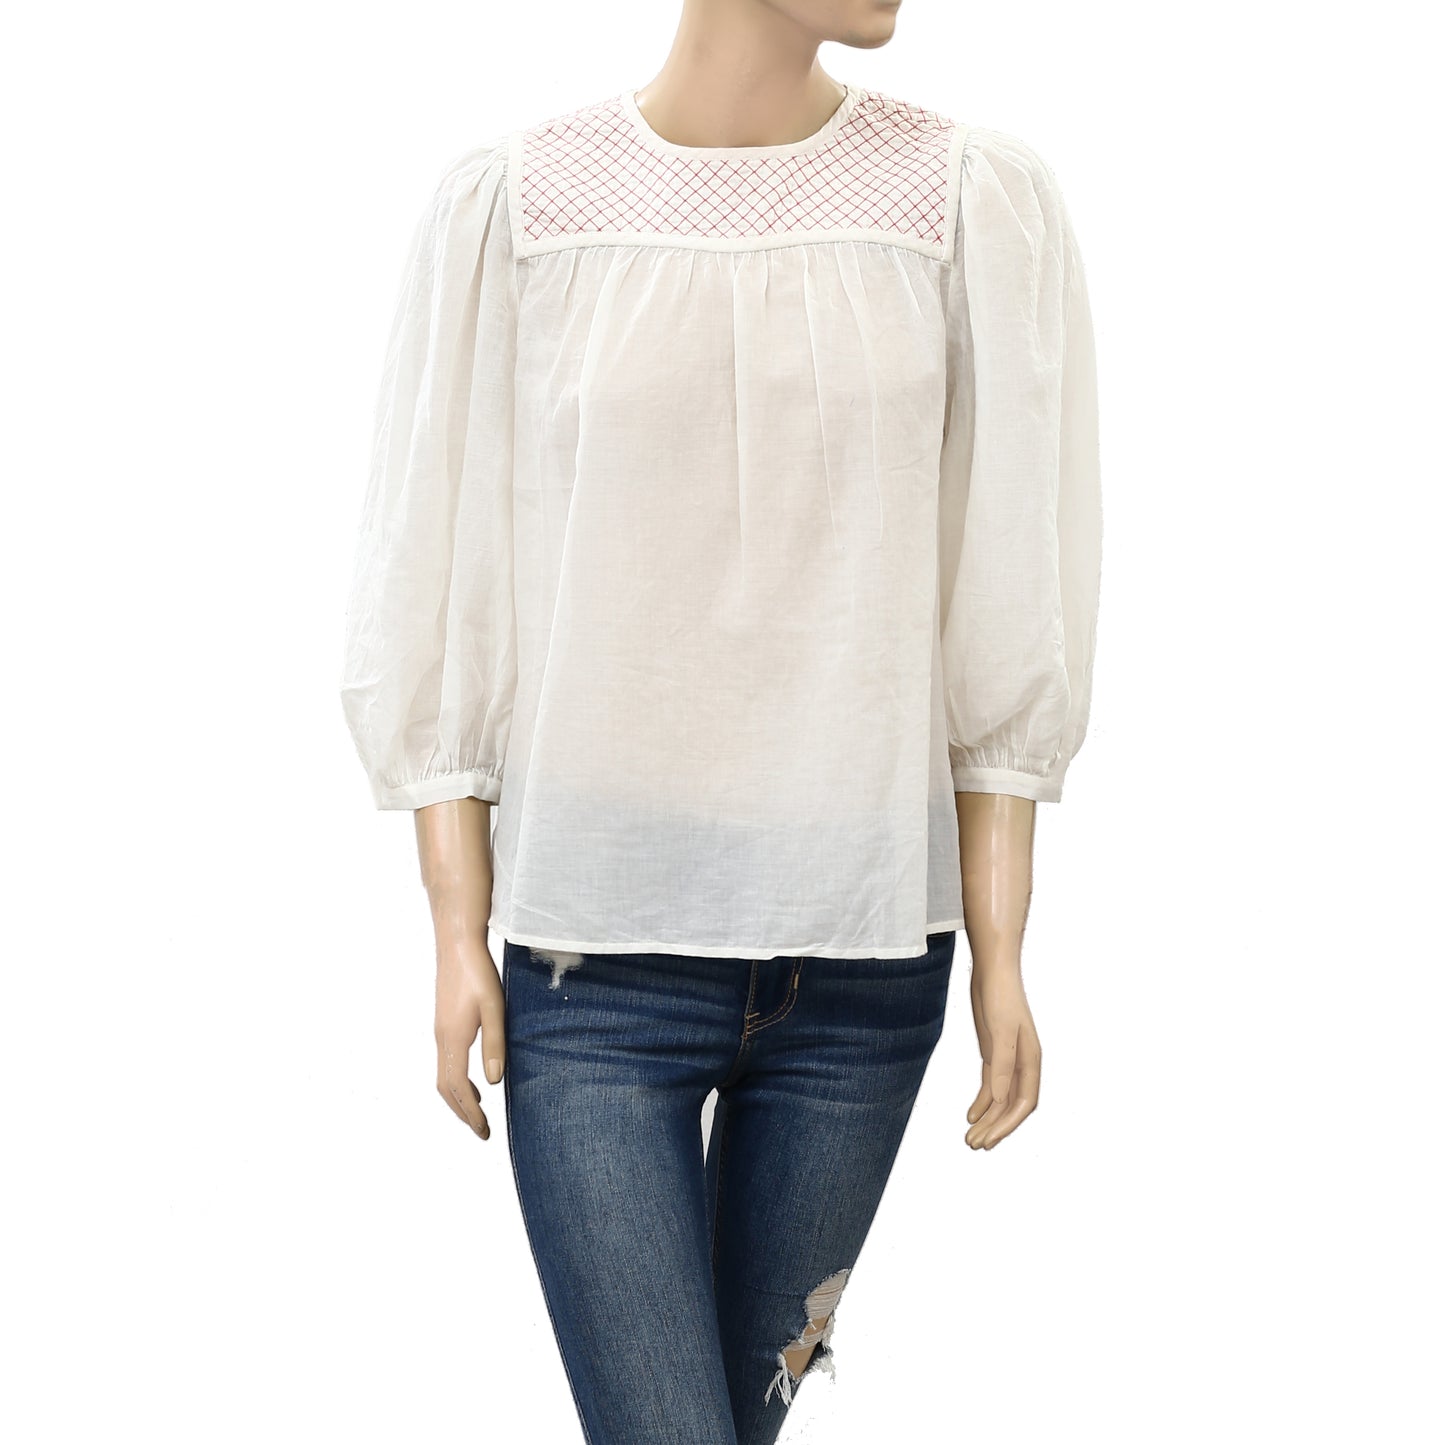 Ulla Johnson Thread Embroidered Ivory Blouse Top